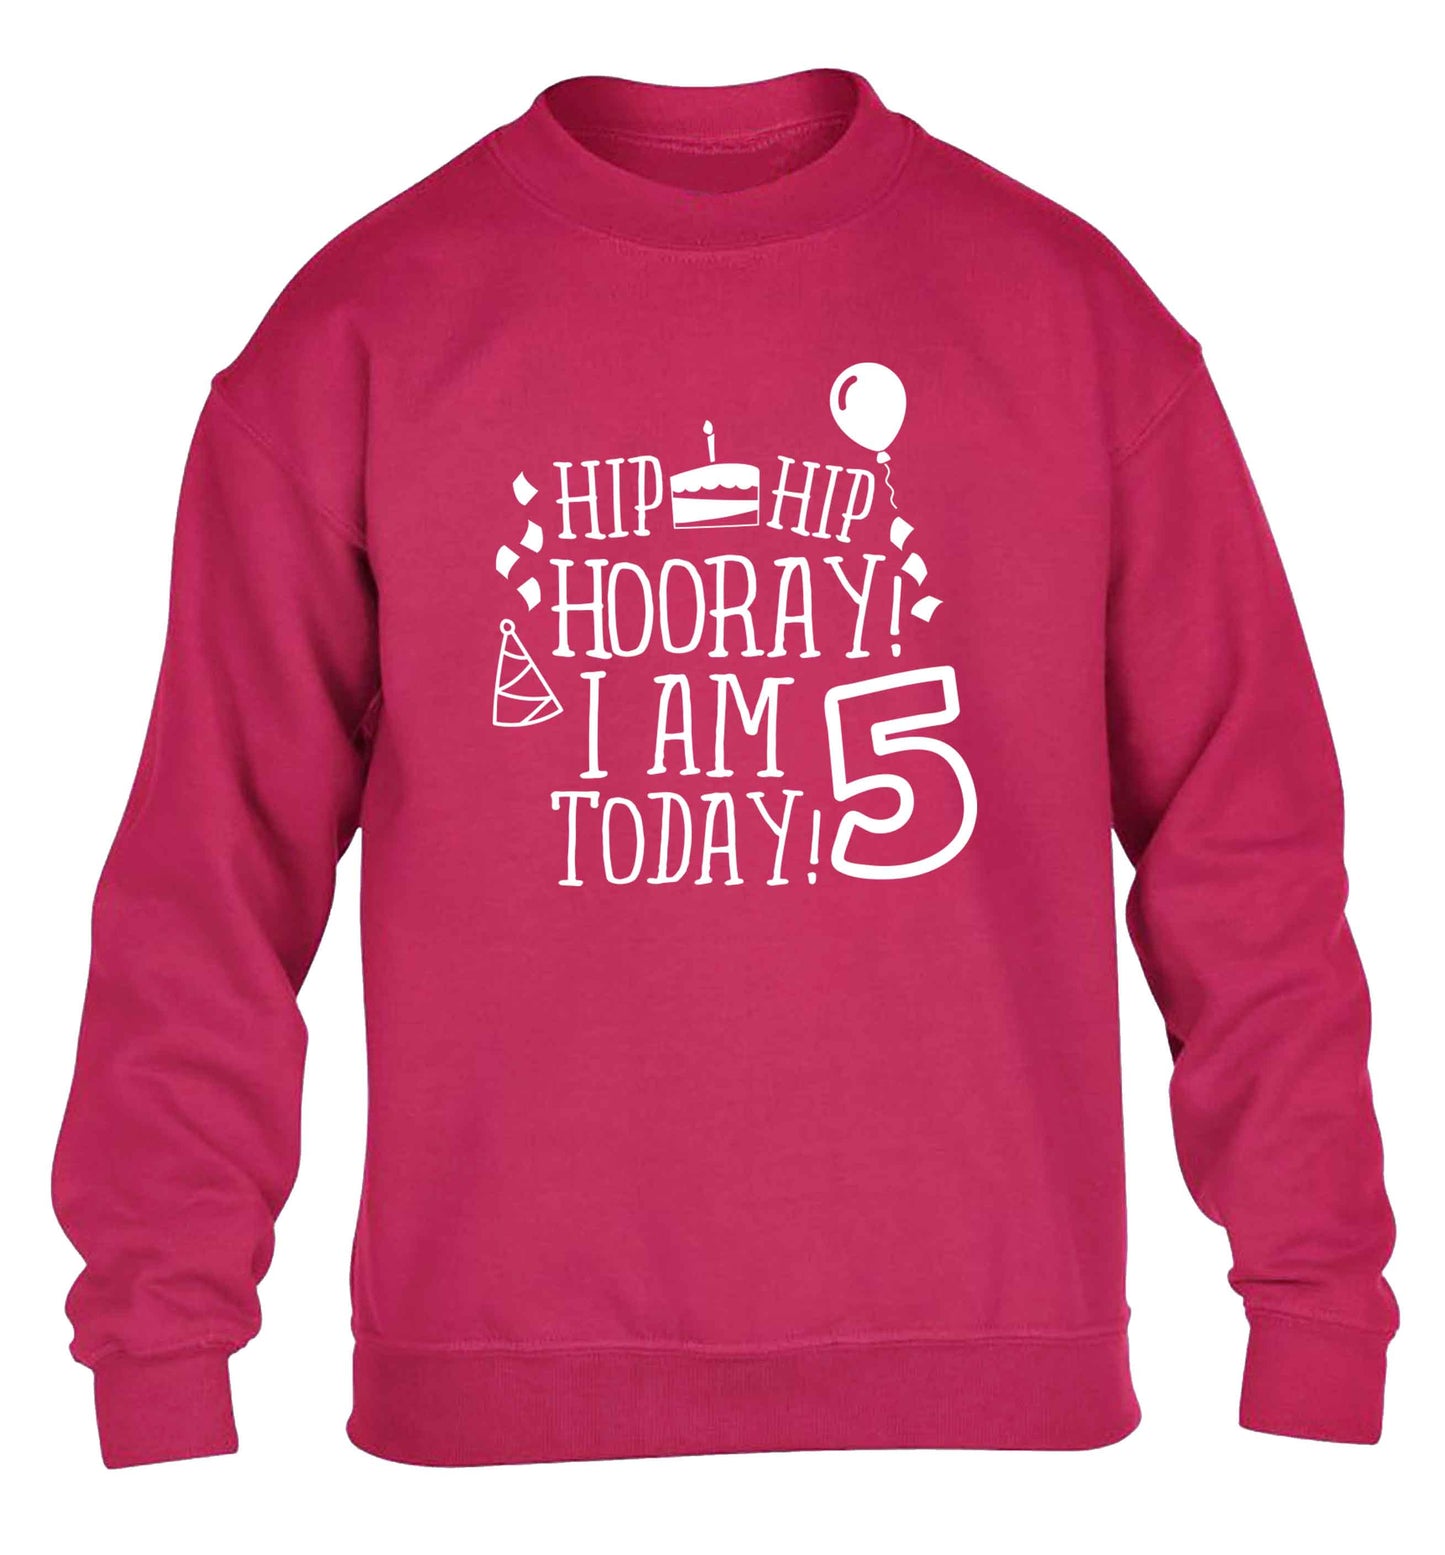 Hip hip hooray I am five today! children's pink sweater 12-13 Years